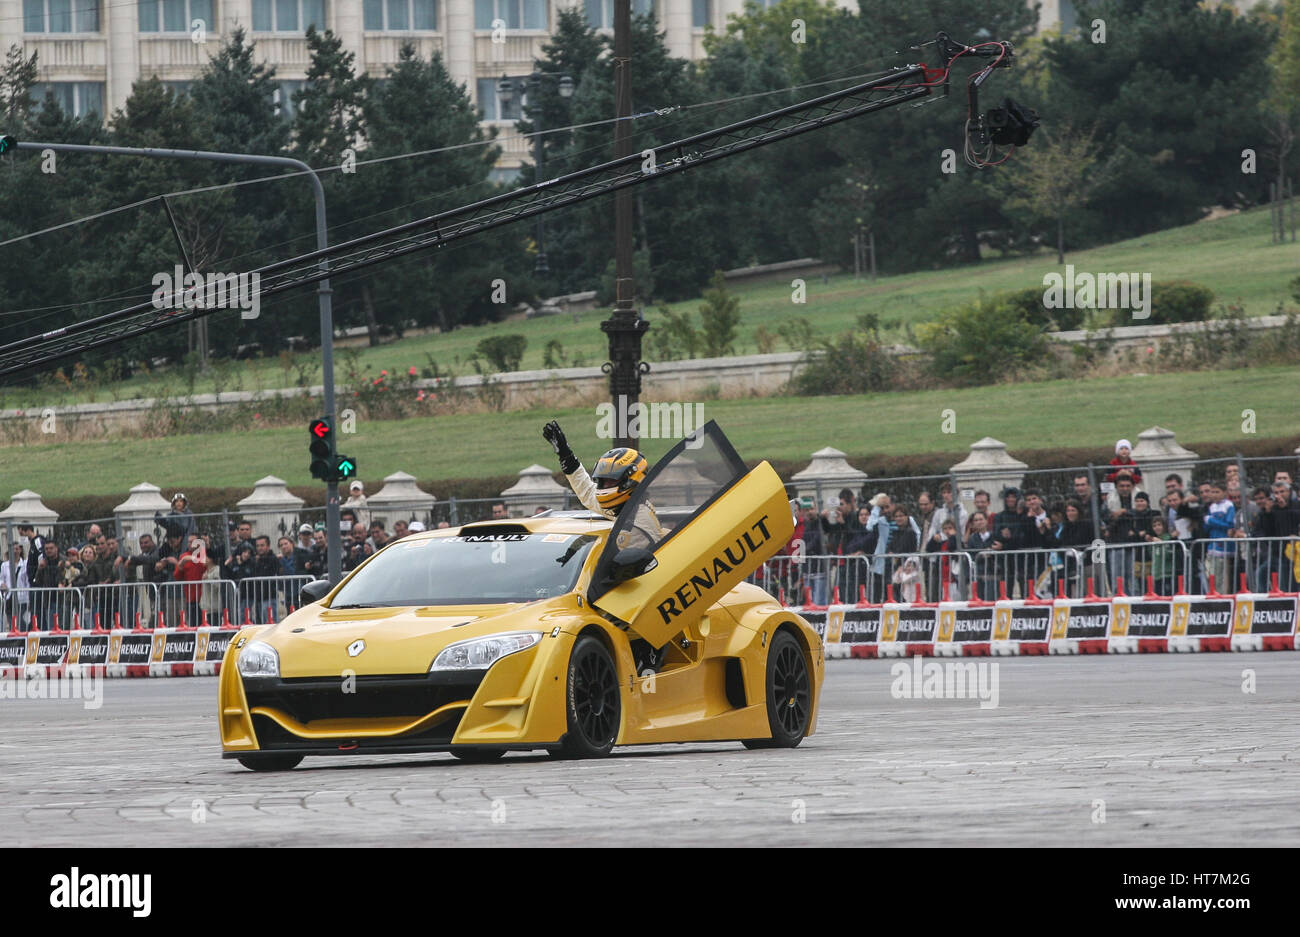 Bucharest, Romania, October 10, 2009: A Renault racing car takes a driving demonstration on the occasion of Renault Road show held in Bucharest. Stock Photo